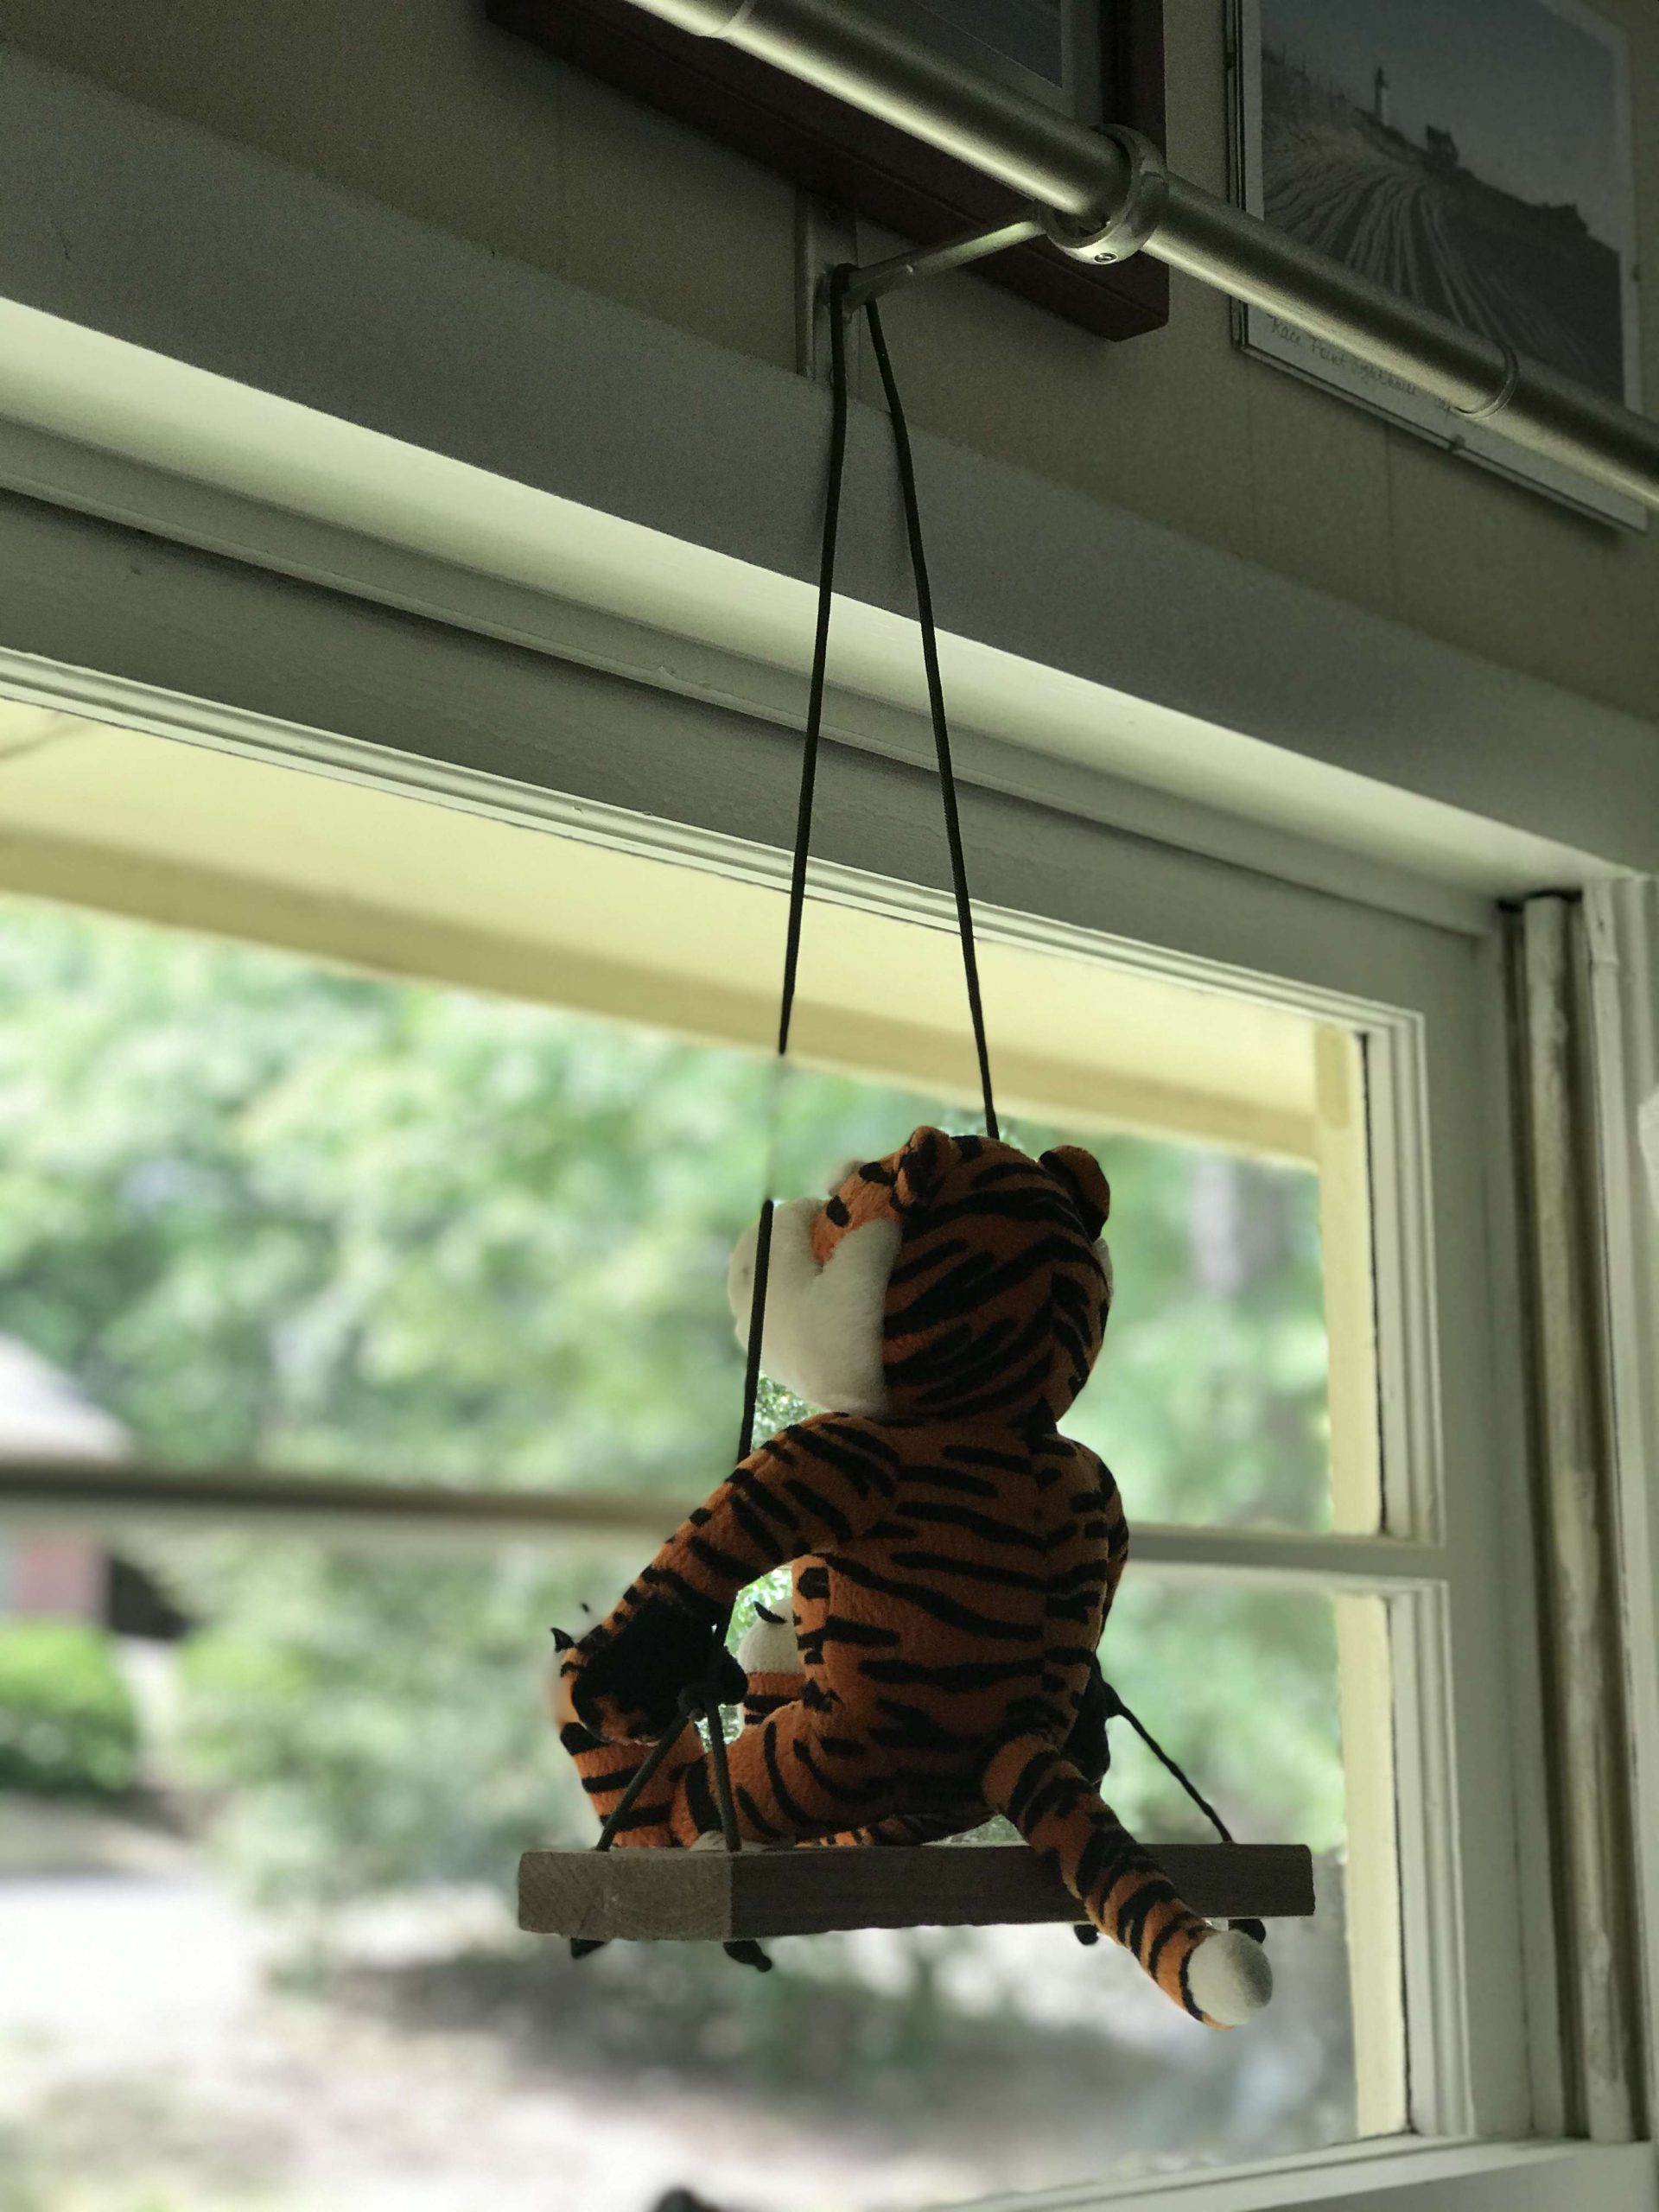 I read on a community Facebook page that the neighborhoods were putting bears in windows for the kids âGoing on a Bear Hunt.â The idea is kids going on walks would âhuntâ for bears in windows. Because itâs Auburn, I used a tiger. Steve built this swing for my Aubie to sit in the window.